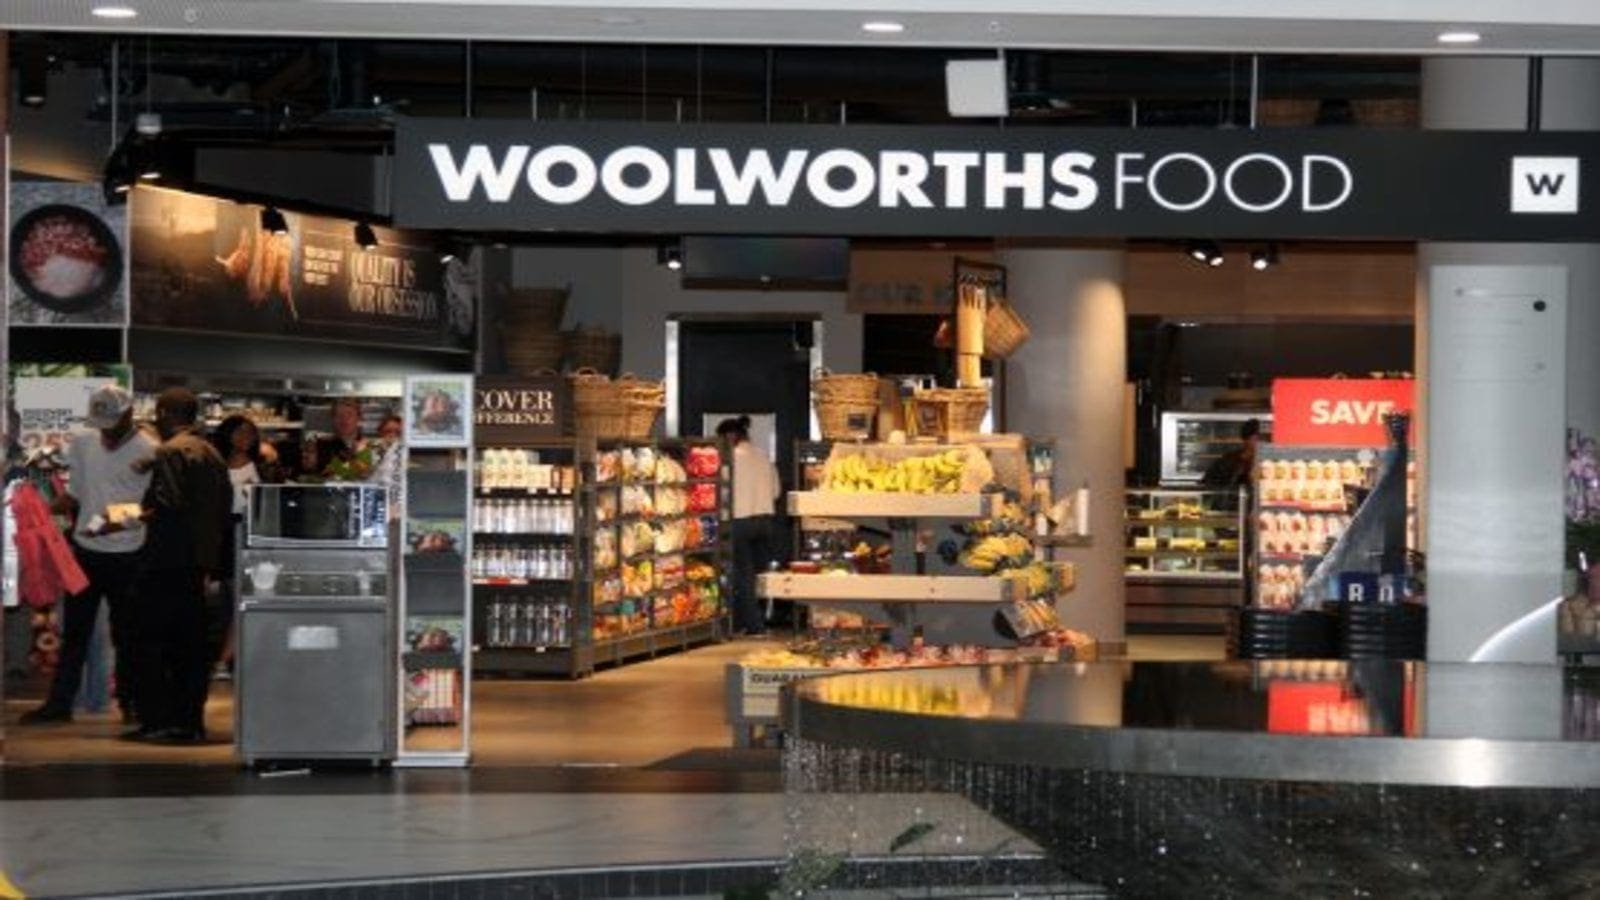 Woolworths South Africa invests US$45.7m in food price reduction fostering affordability